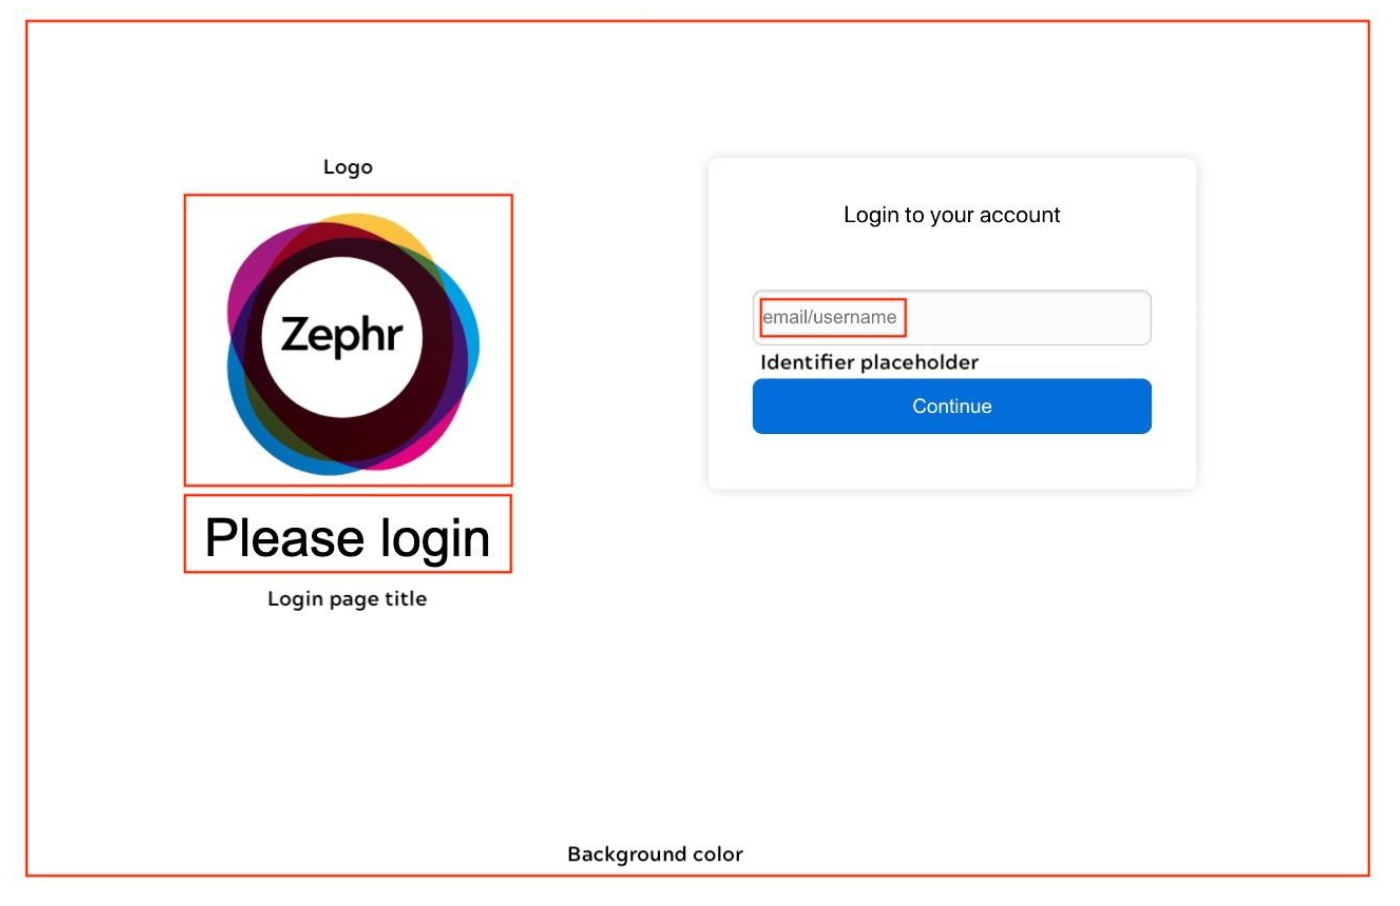 thirdparty_login.png